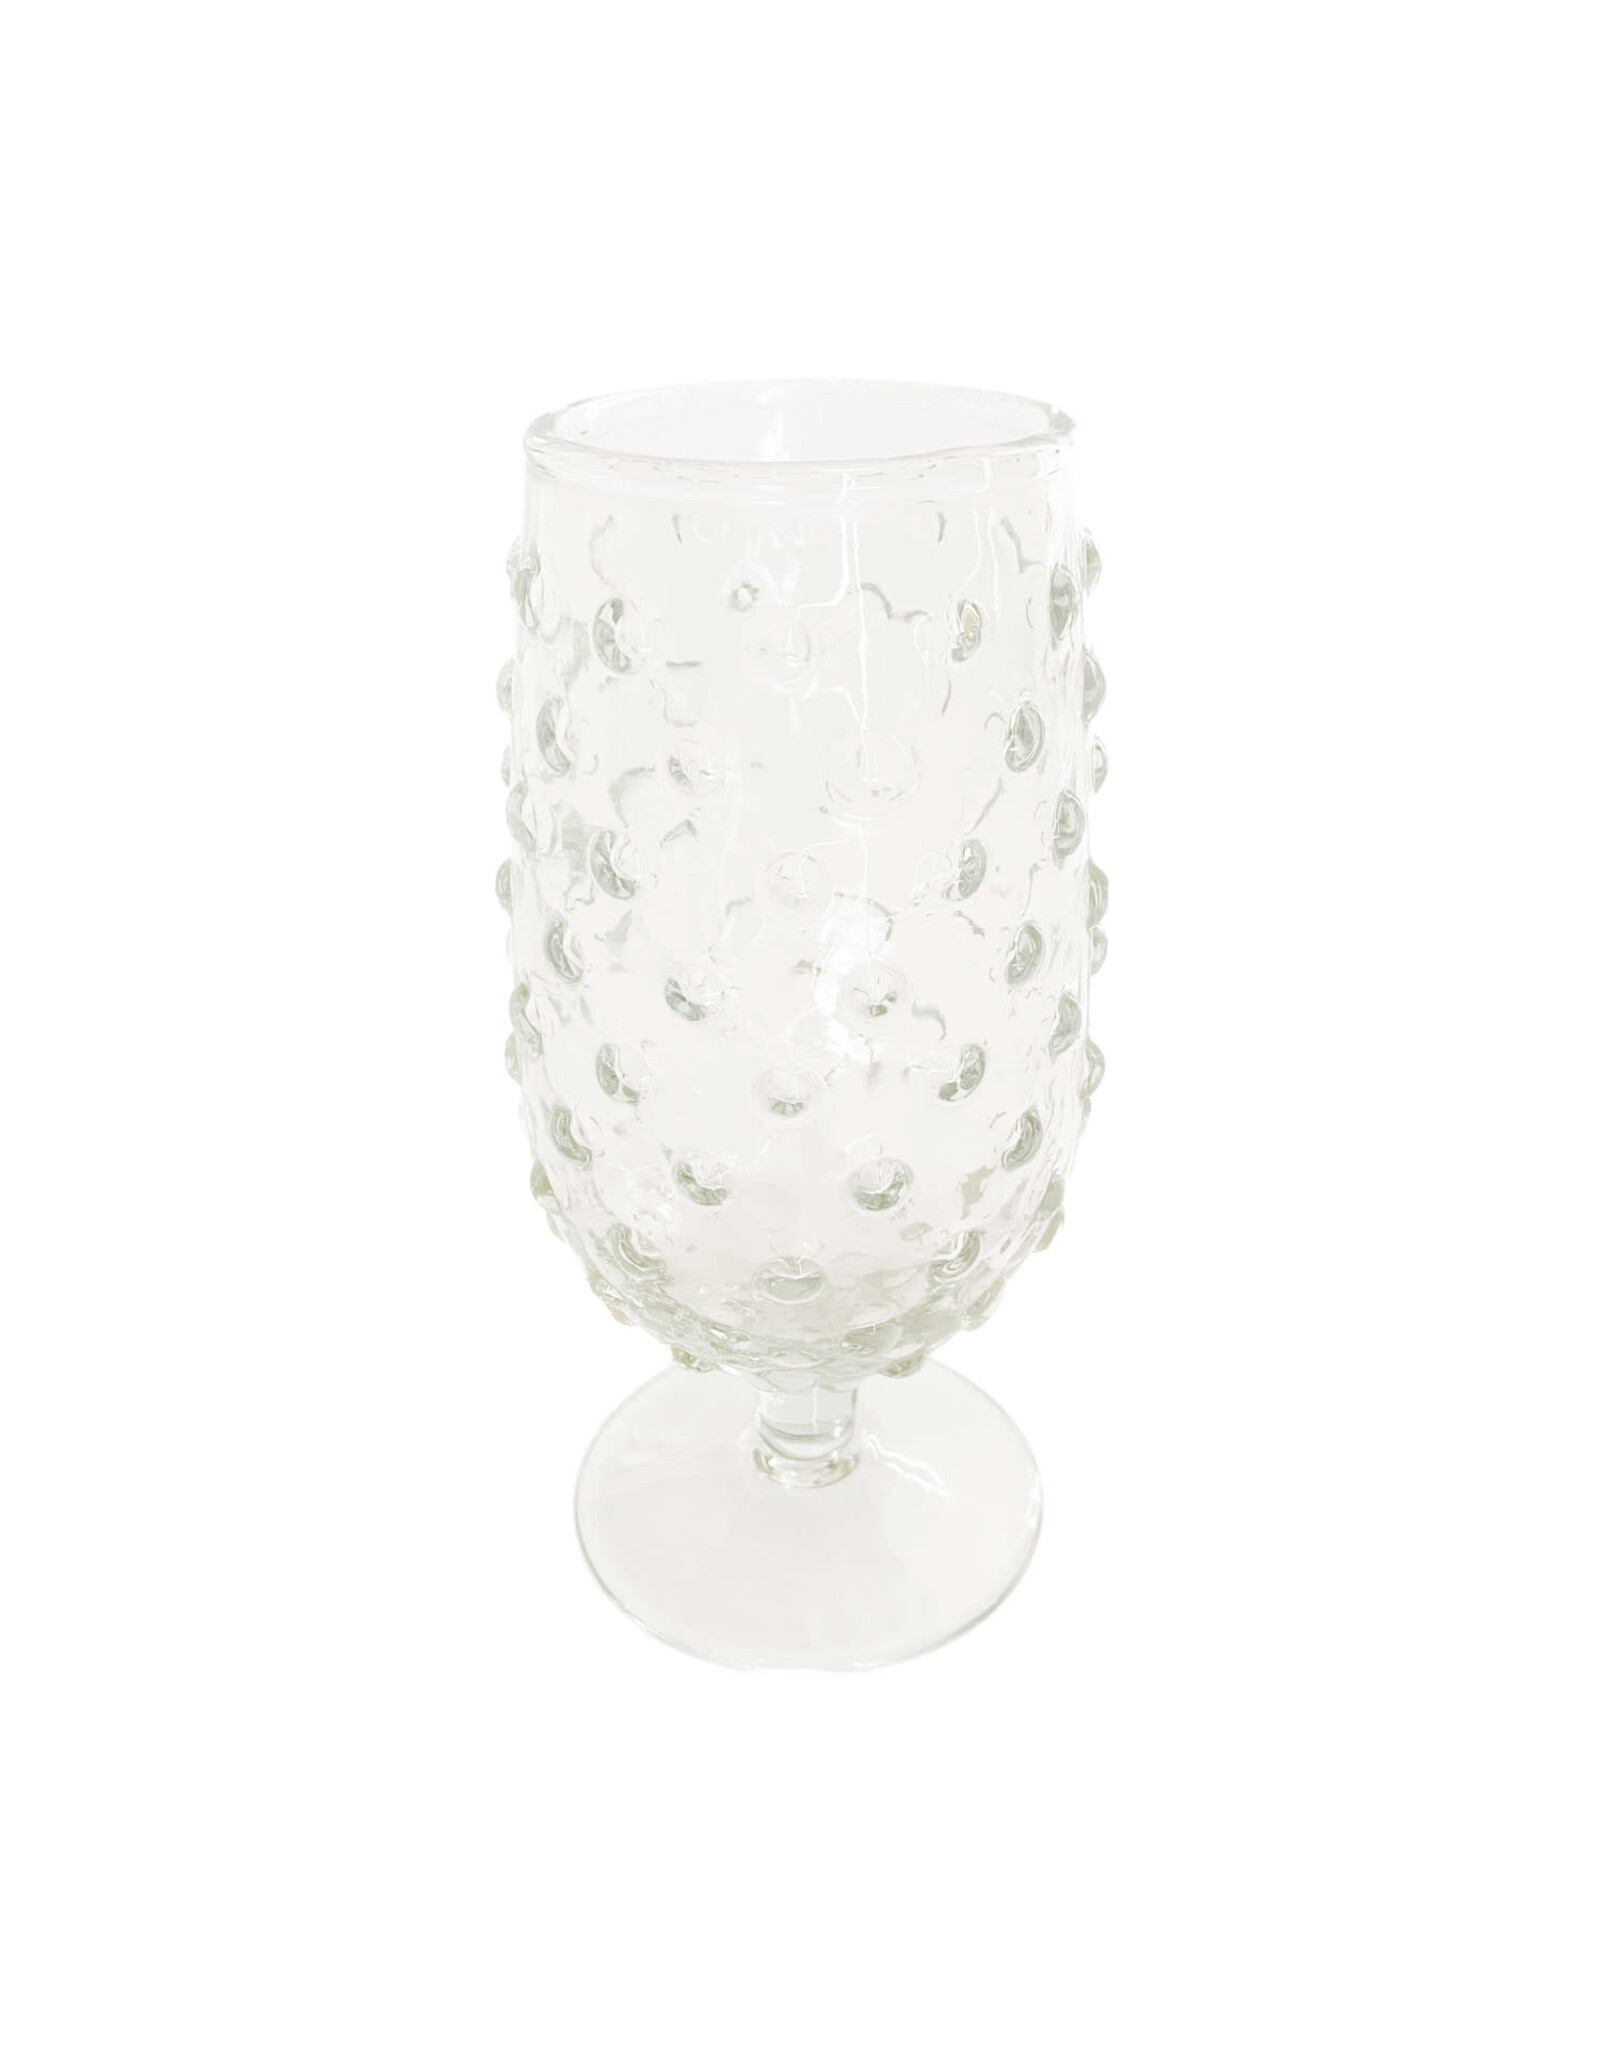 12 oz. Recycled Glass Hobnail Stemmed Drinking Glass DF8543